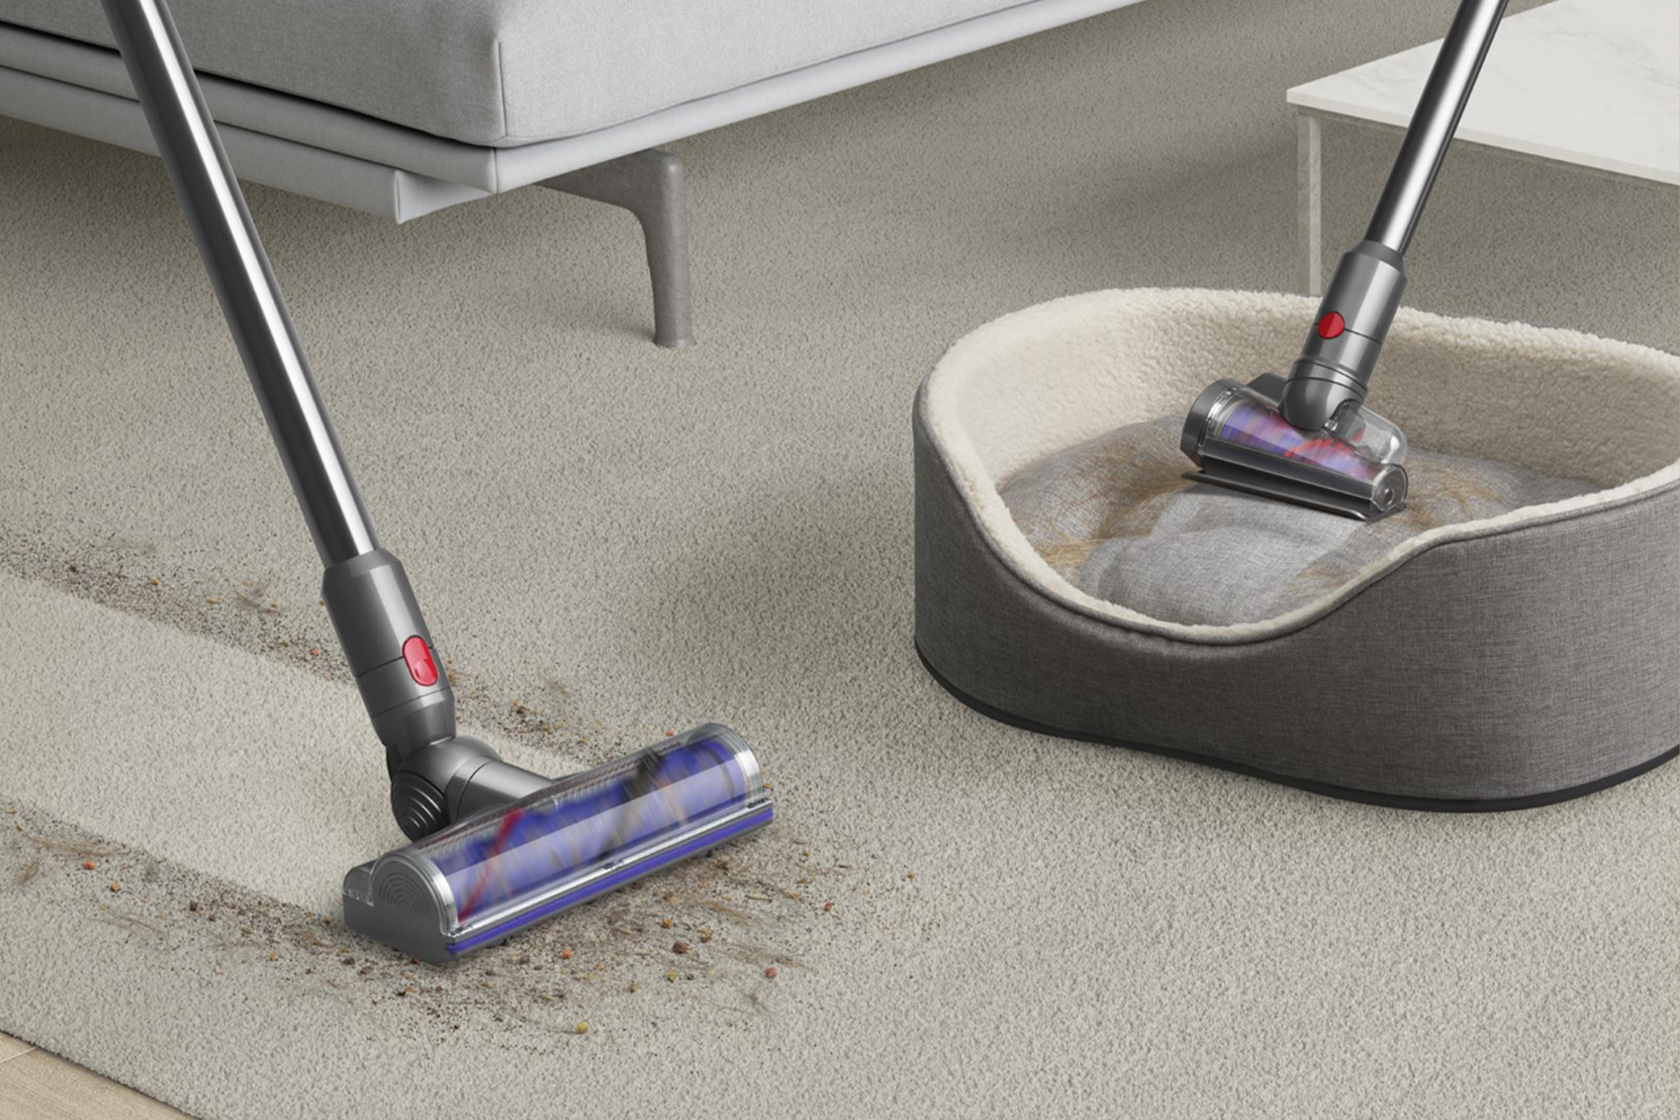 Dyson lowered the price of their powerful V8 Absolute vacuum by $150